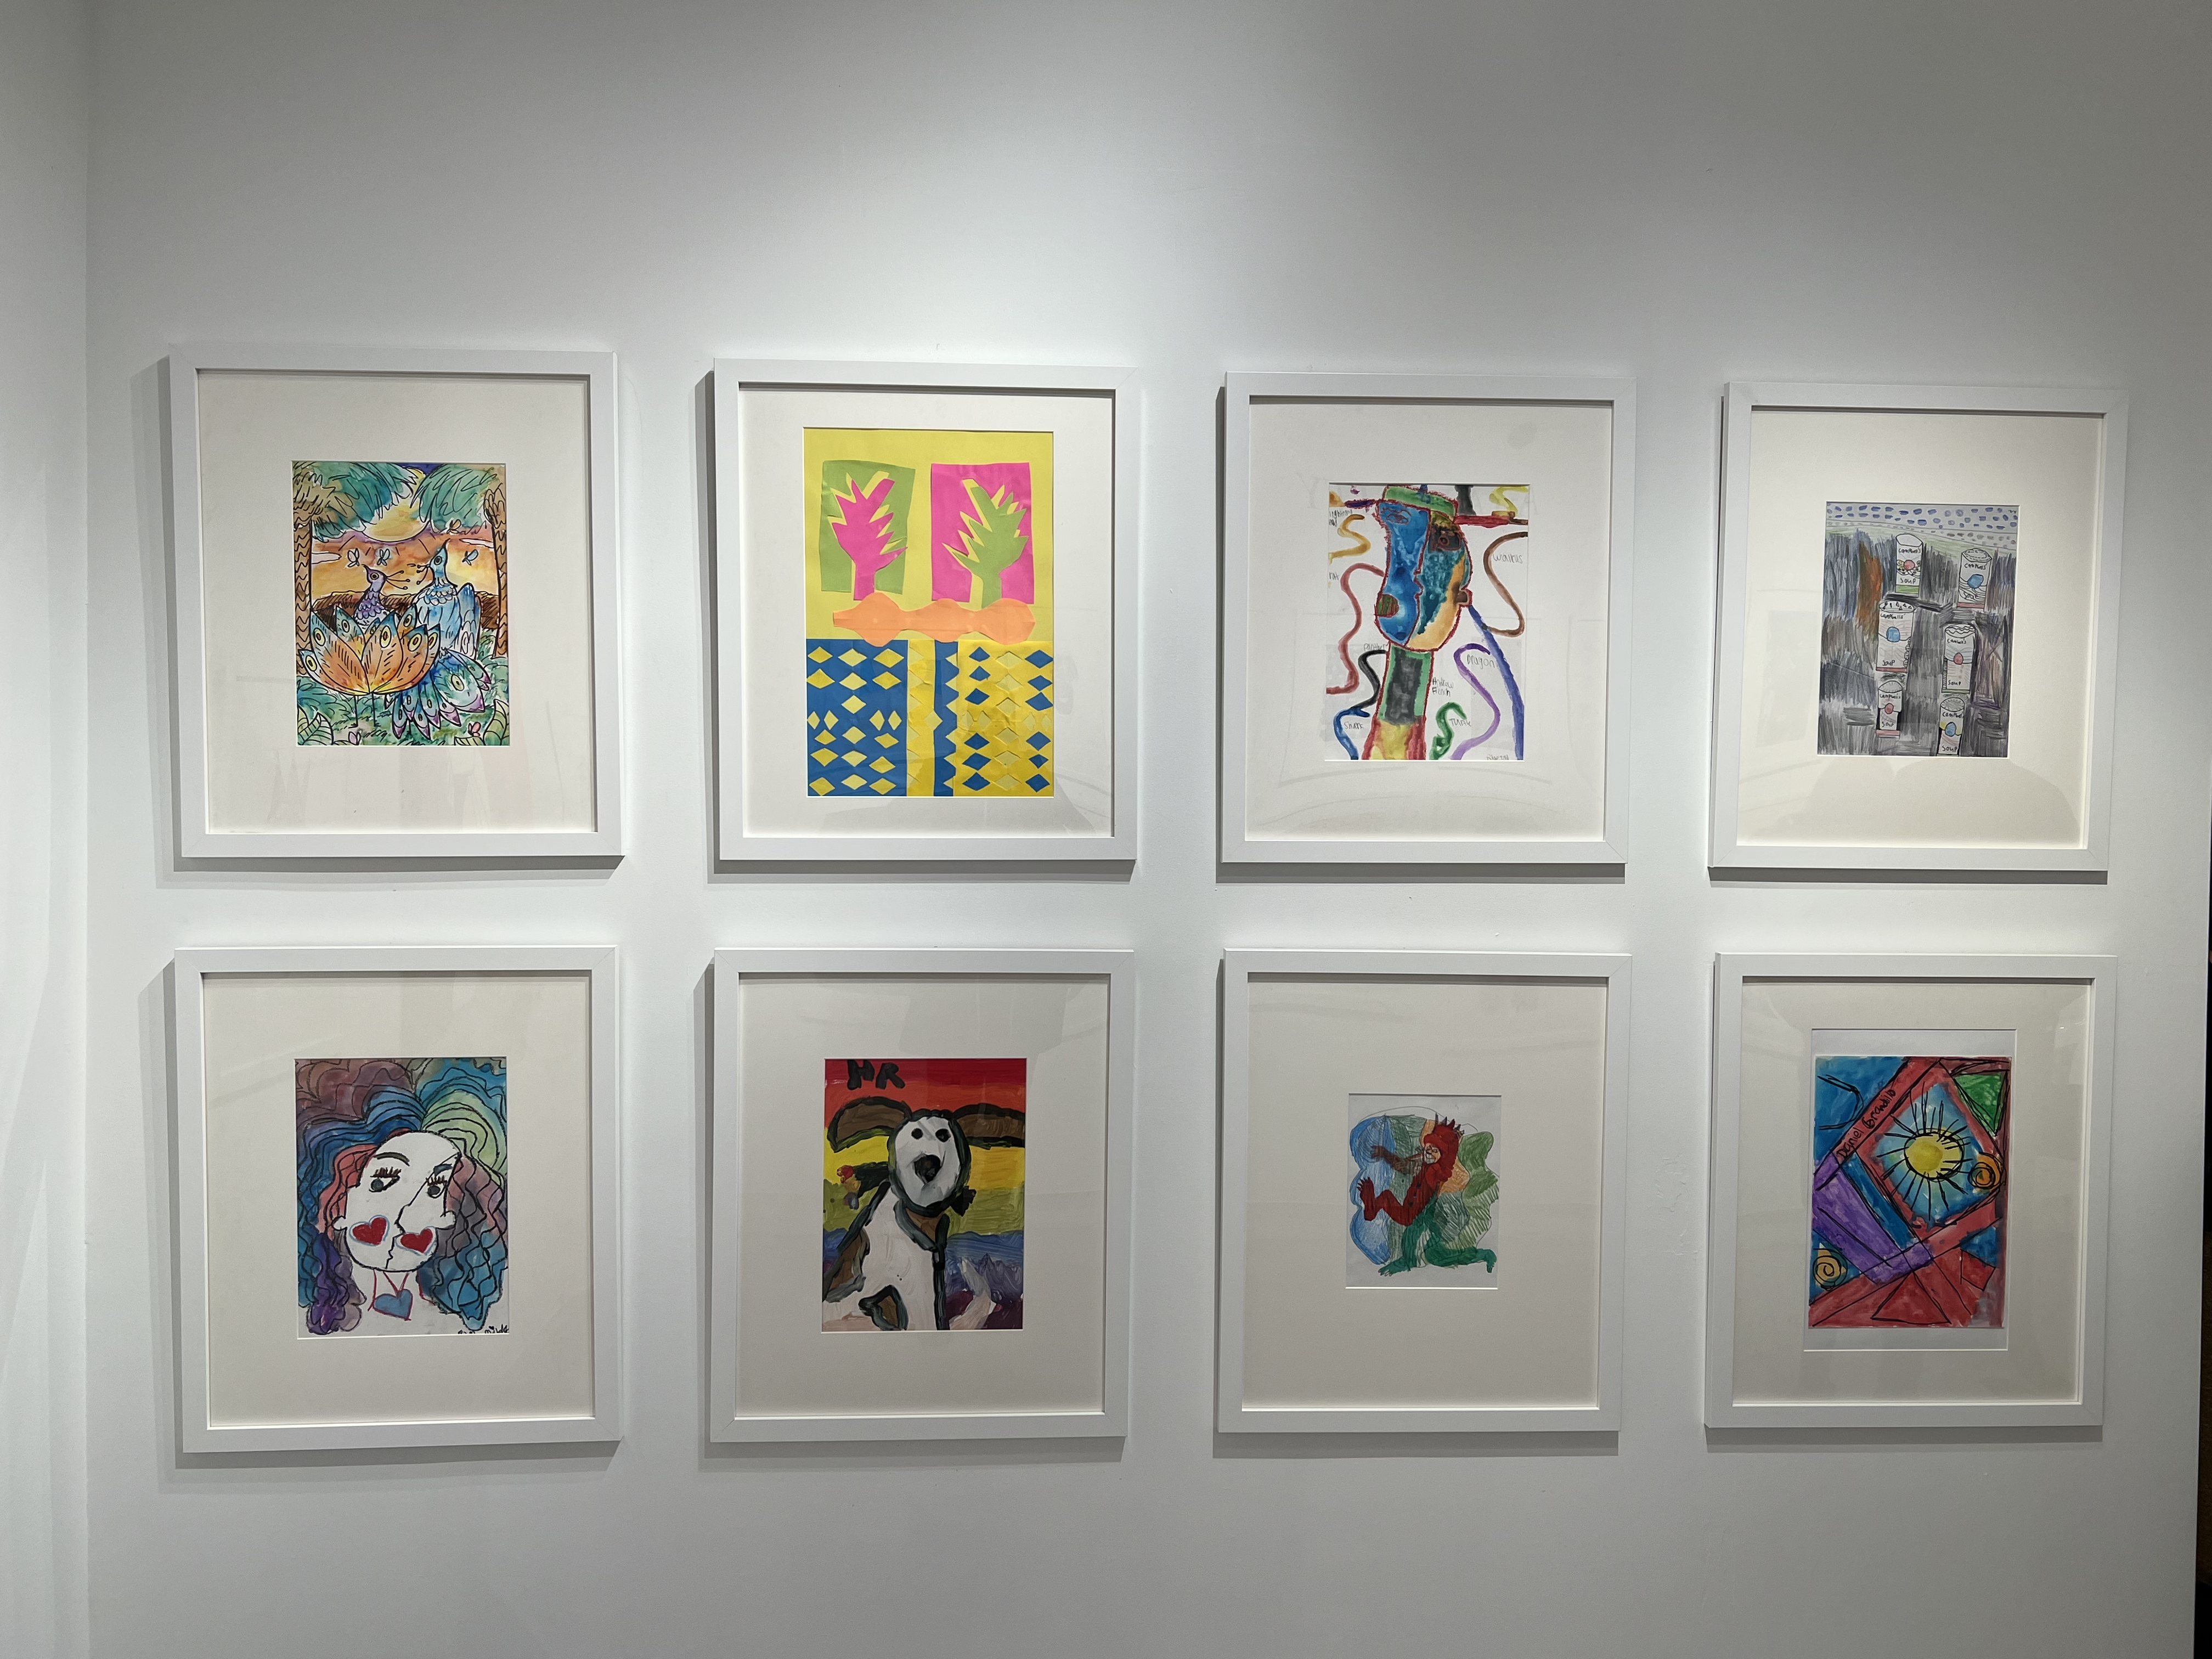 A collection of student art work being showcased at Agora Gallery in New York City